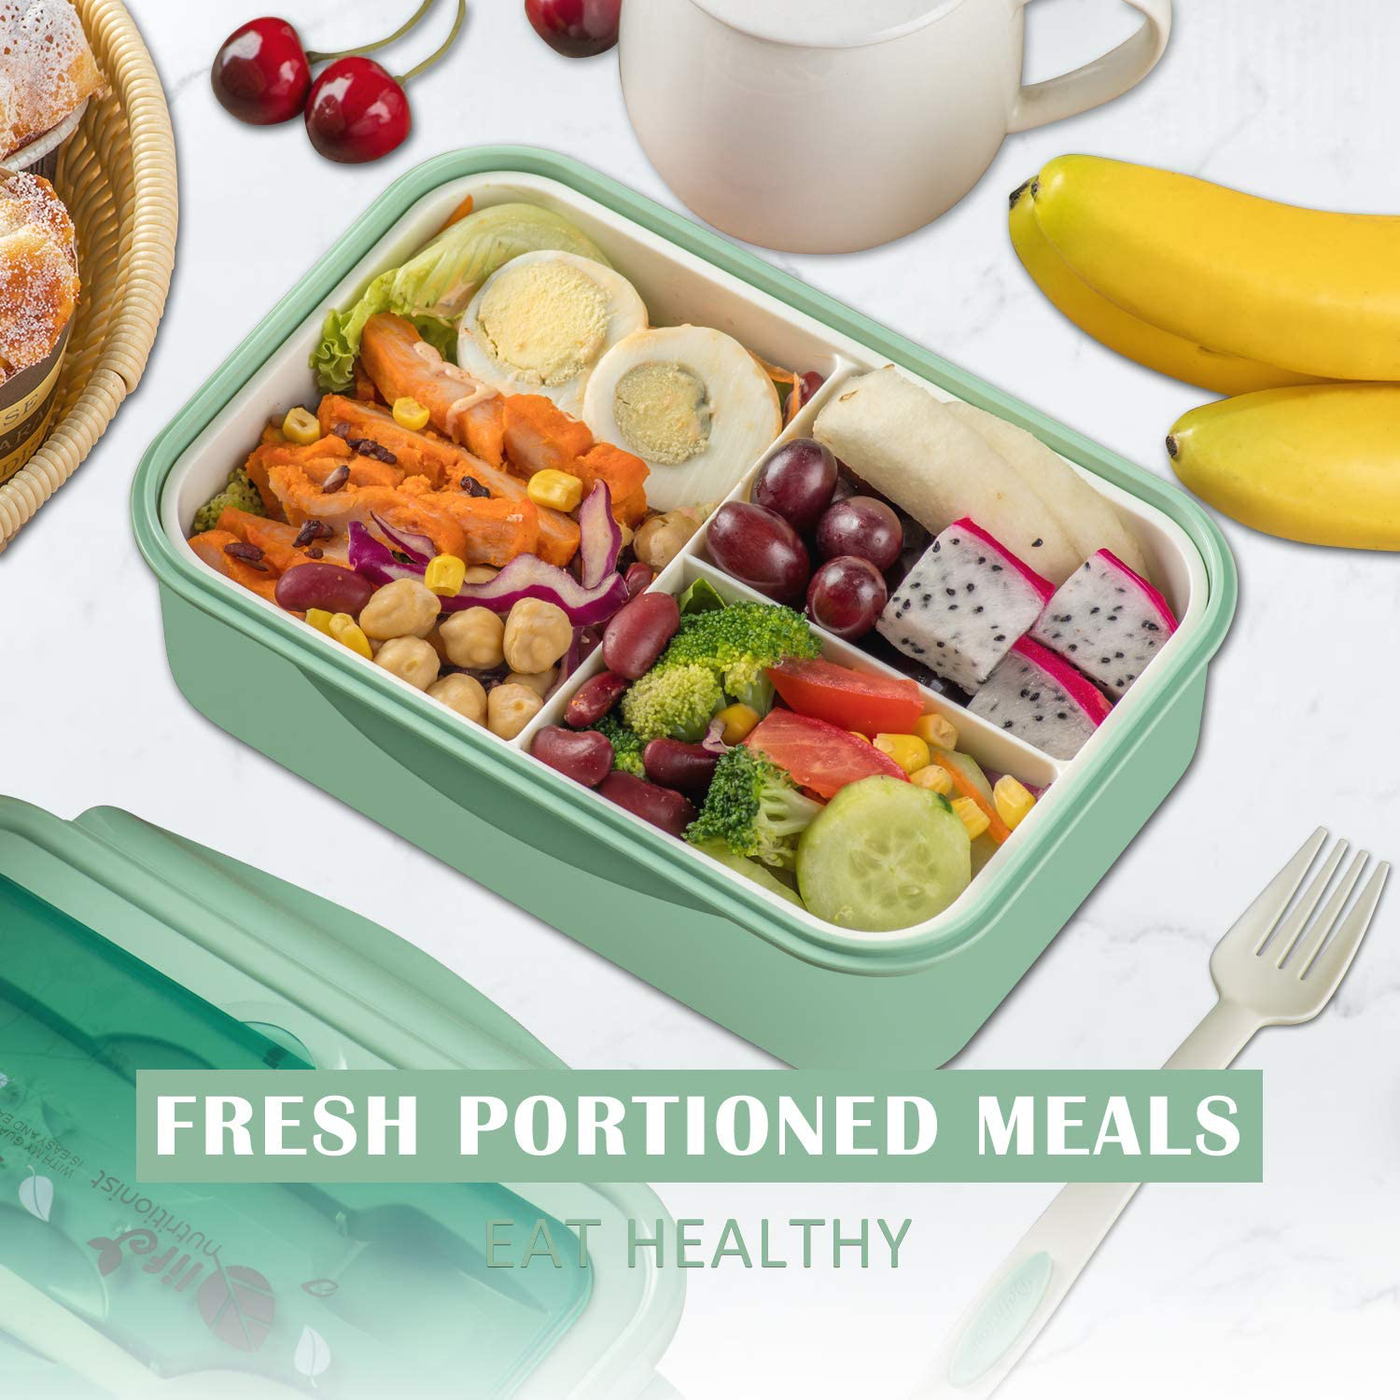 Bento Boxes for Adults - 1100 ML Bento Lunch Box For Kids Childrens With Spoon & Fork - Durable, Leak-Proof for On-the-Go Meal, BPA-Free and Food-Safe Materials